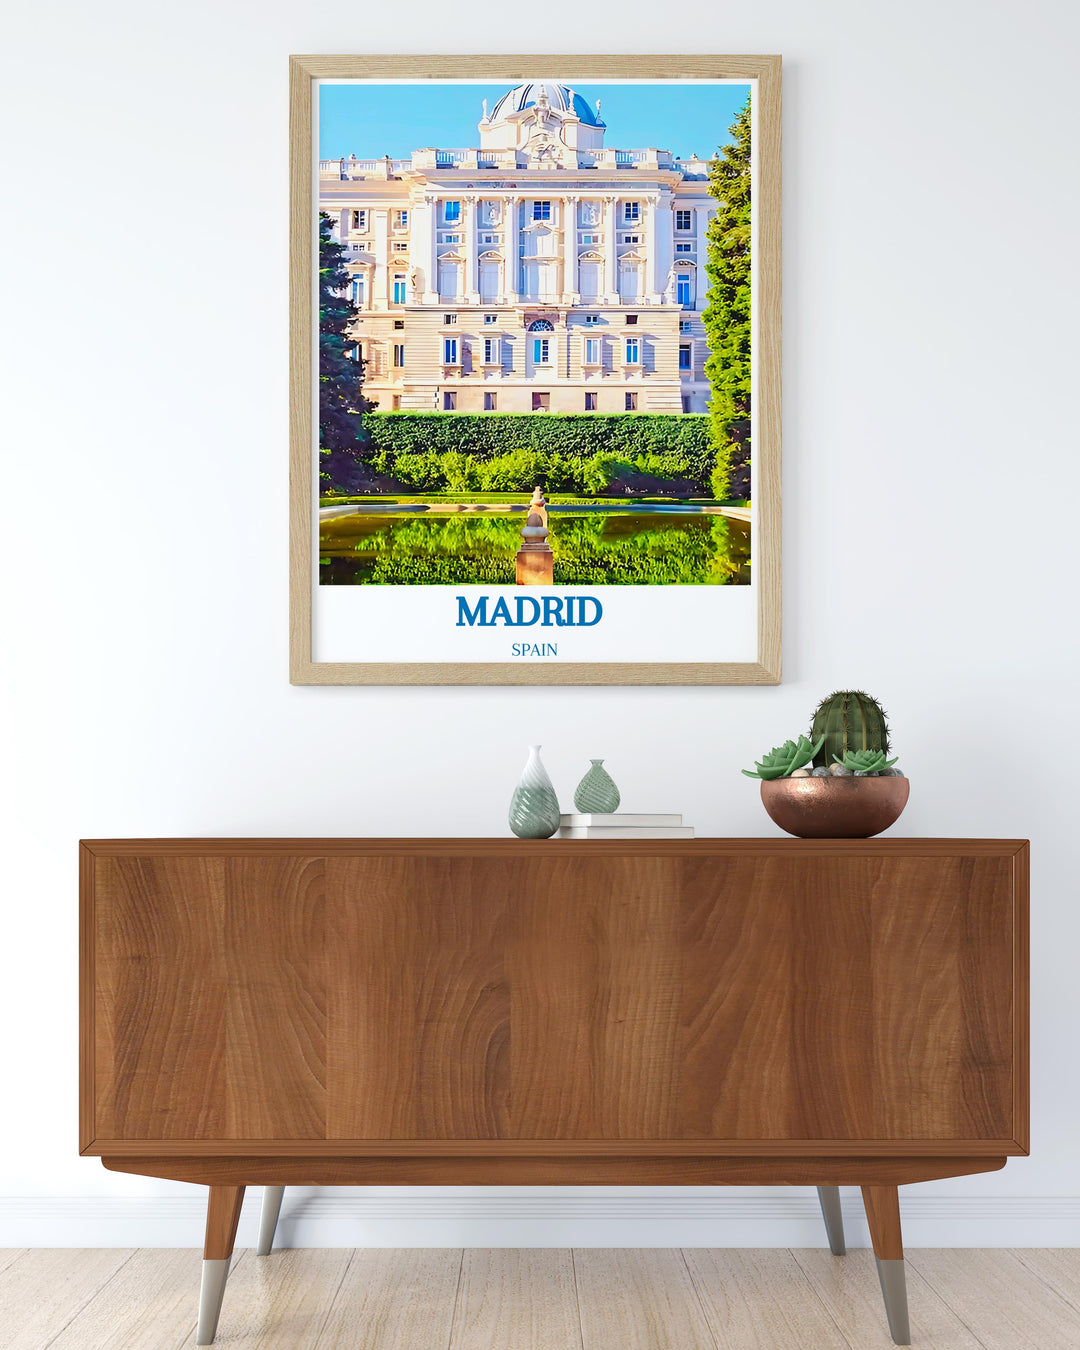 Vintage and modern mix in Spanish posters, highlighting famous landmarks and cultural symbols.